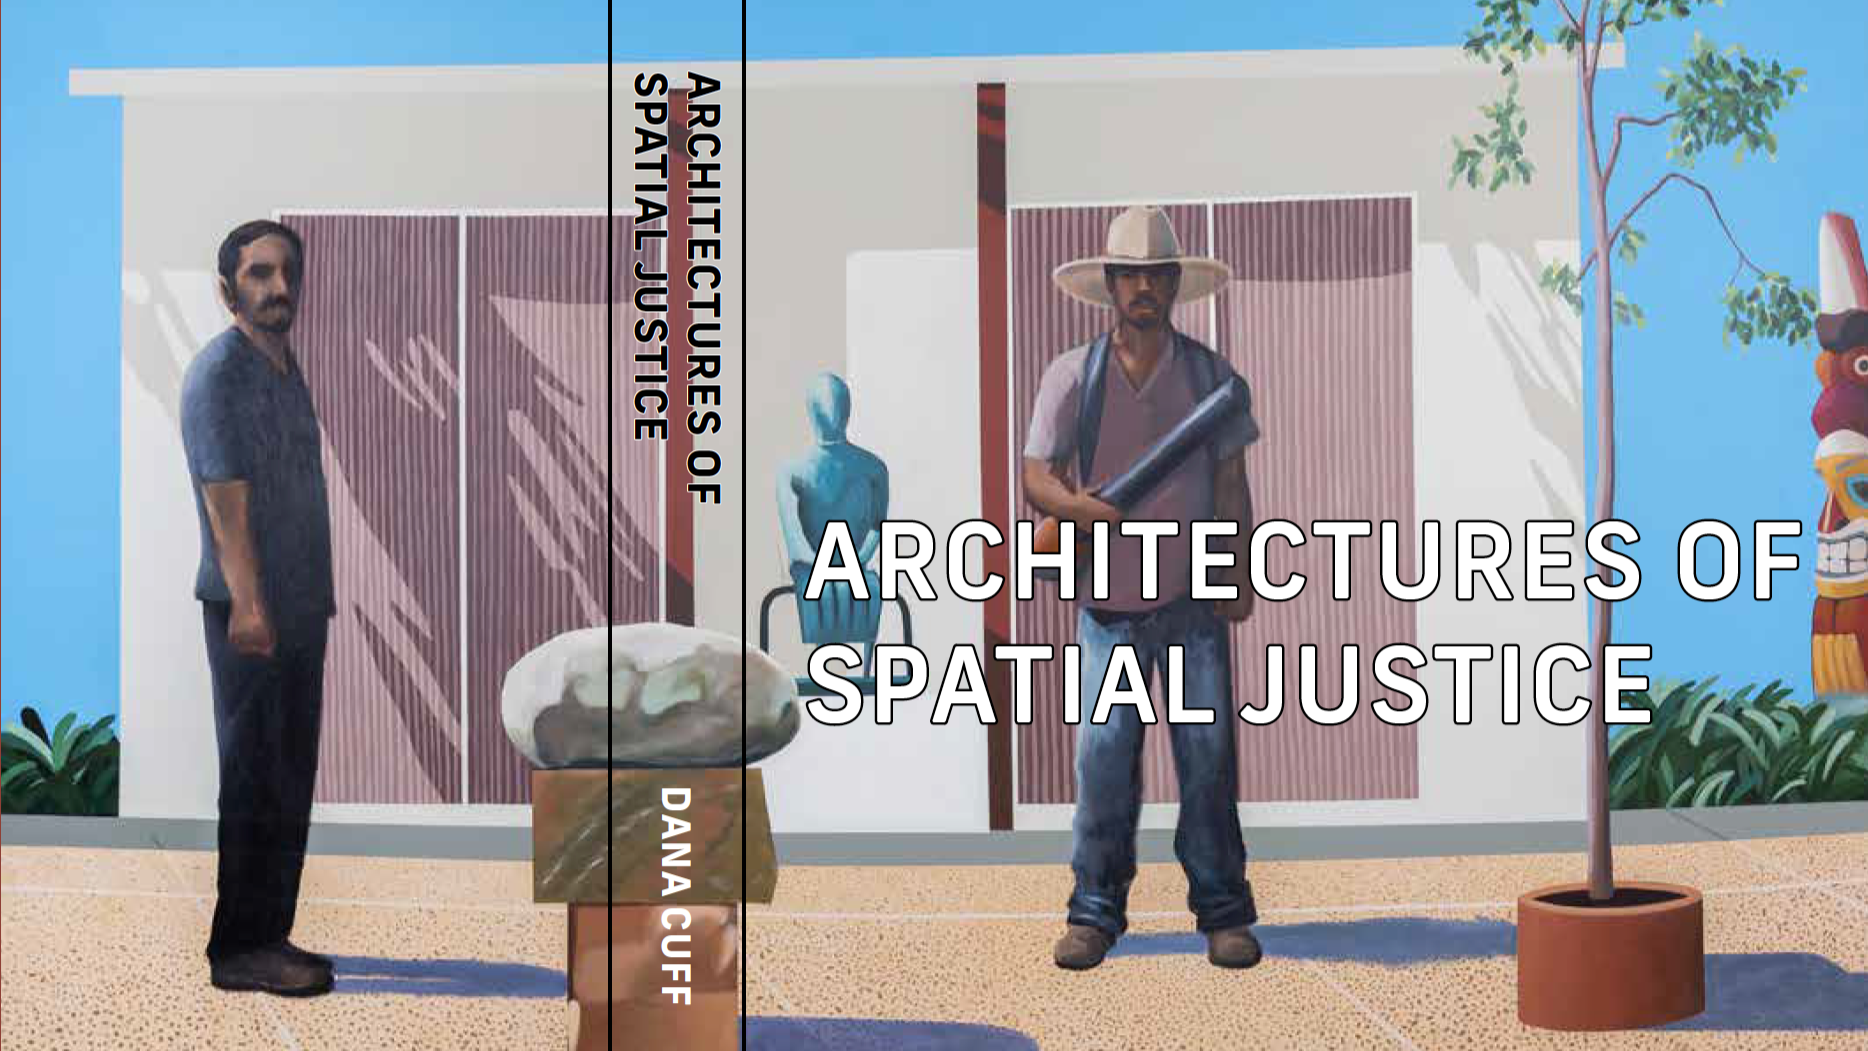 Glass House Presents: Architectures of Spacial Justice